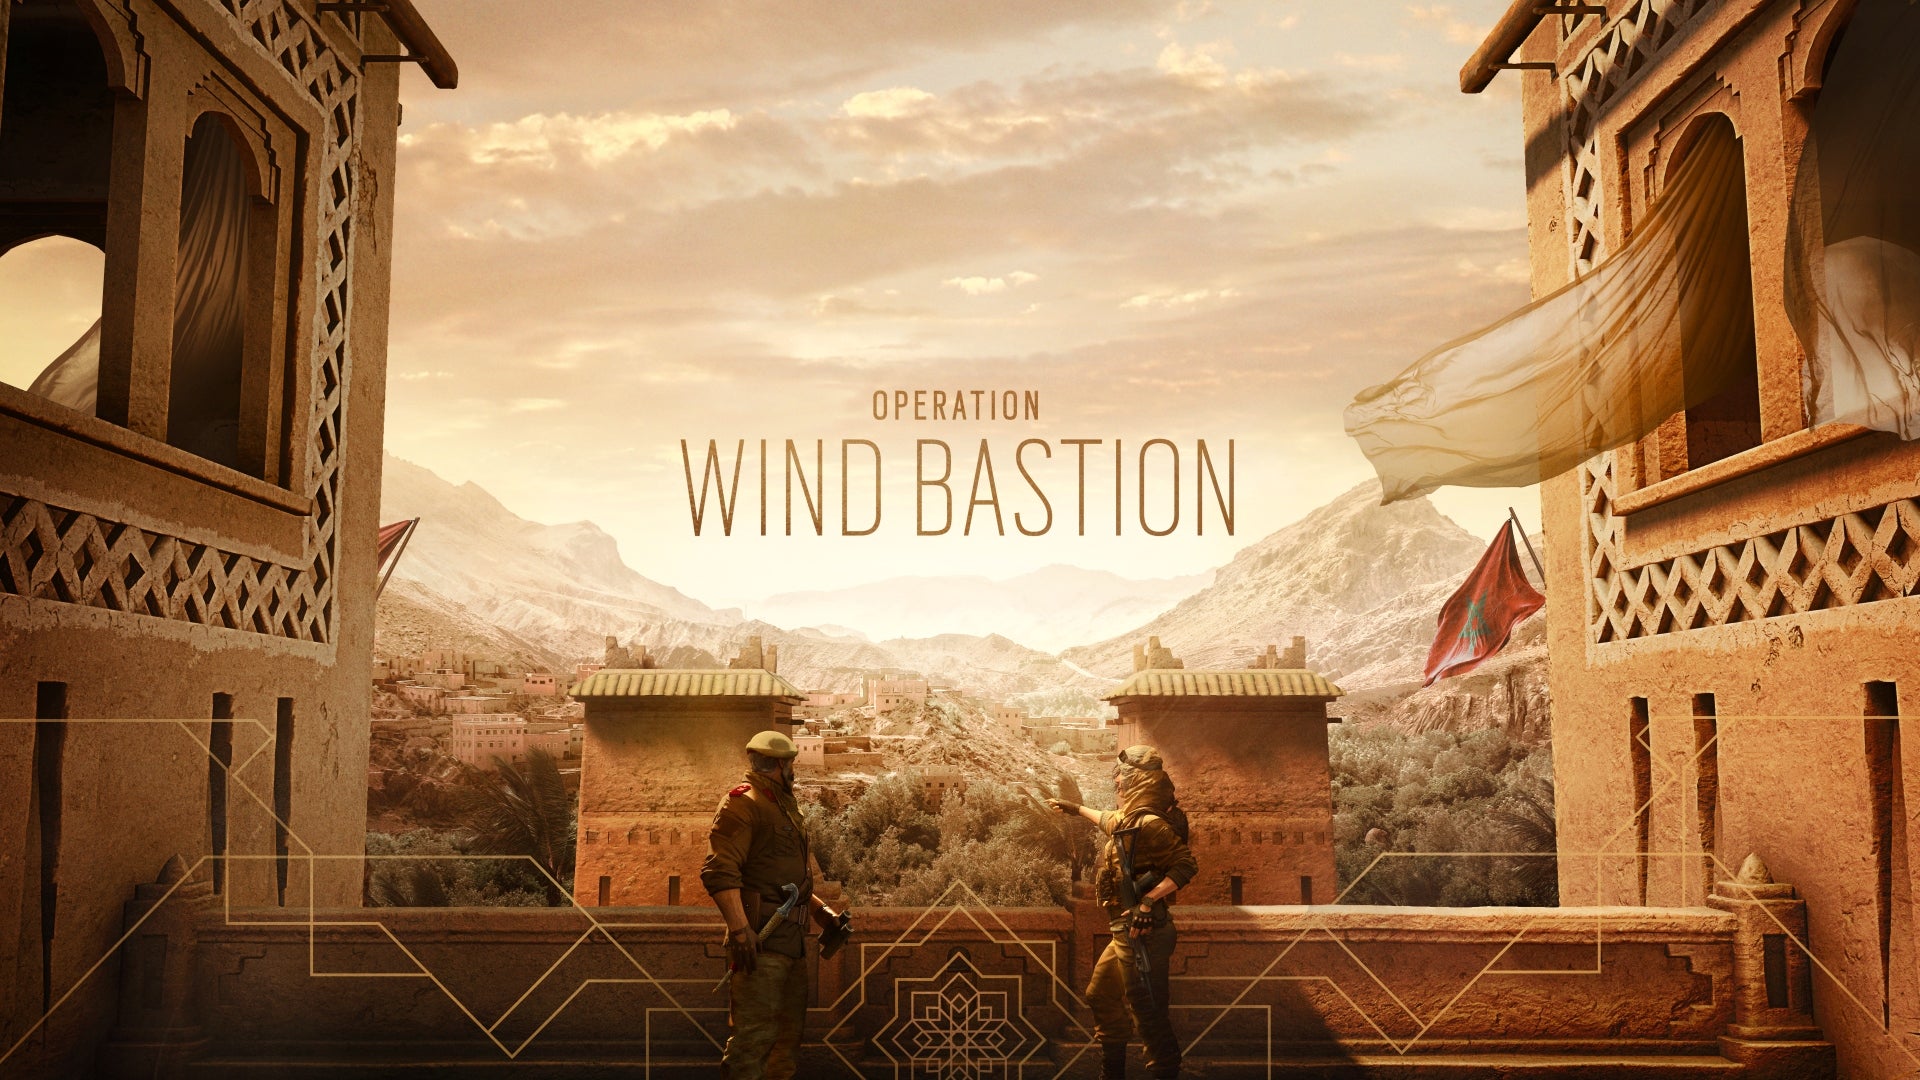 Rainbow Six Siege heads to Morocco in Operation Wind Bastion.